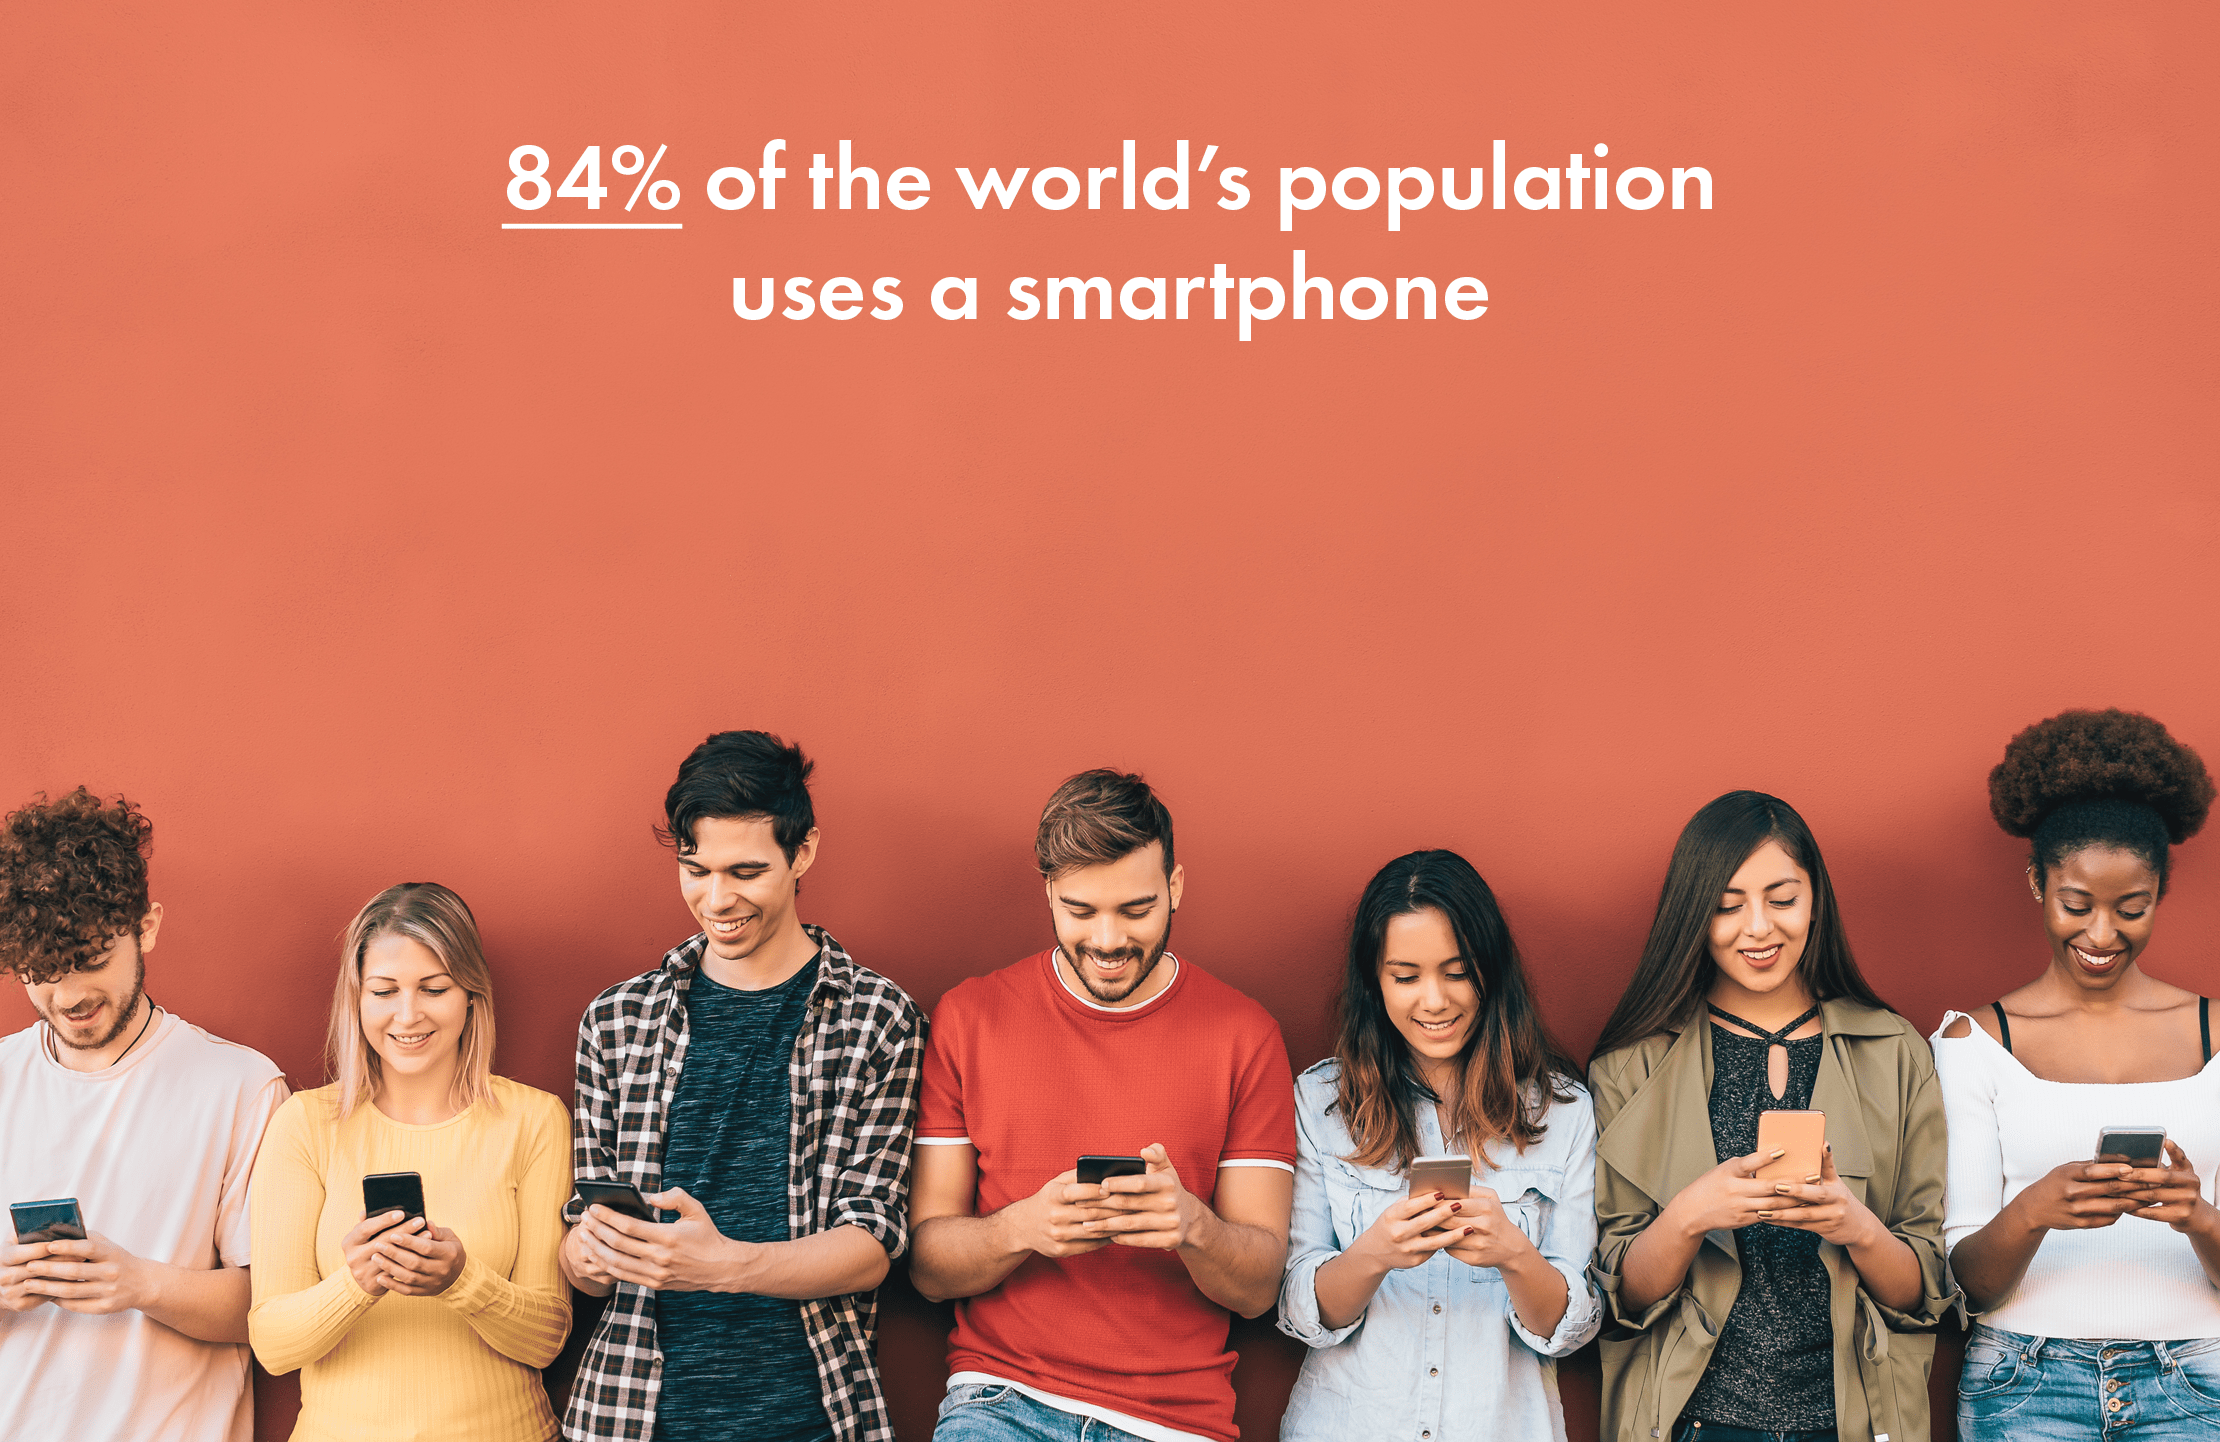 83.72% of the world's population uses a smartphone